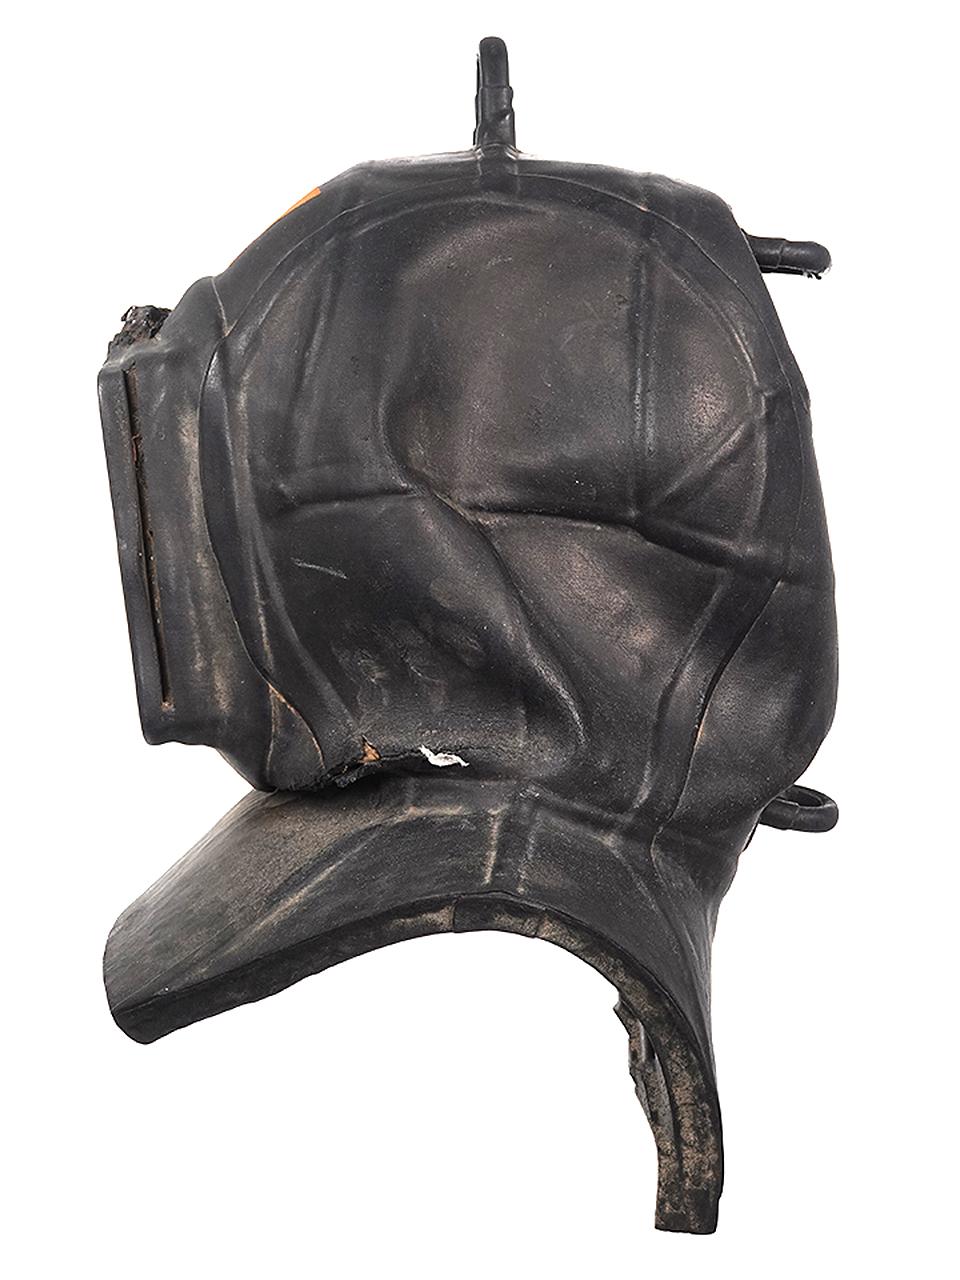 This is an early all rubber and glass shallow water diving helmet. These were used mostly in marinas for underwater ship/boat maintenance. Divers used these for cleaning barnacles and small close to the surface repairs. It displays very well.